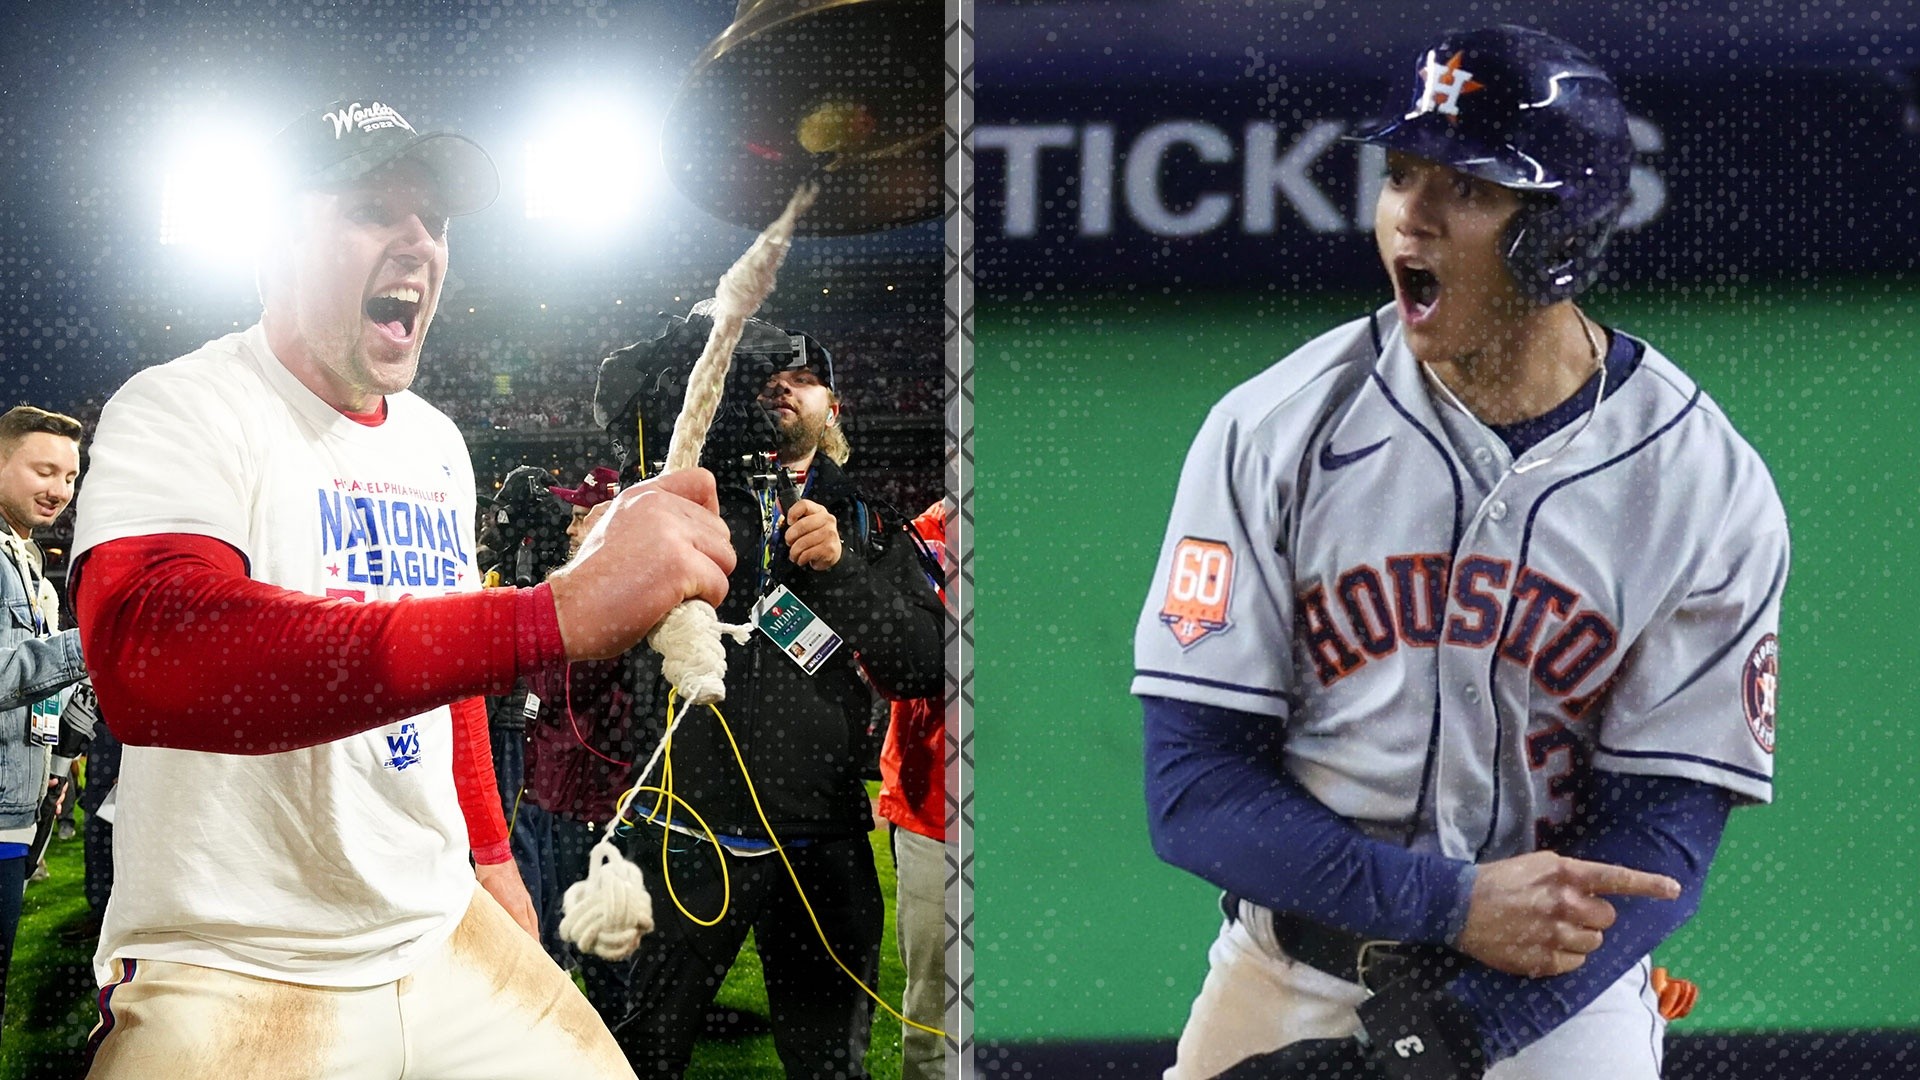 Phillies to face Astros in first World Series in over a decade